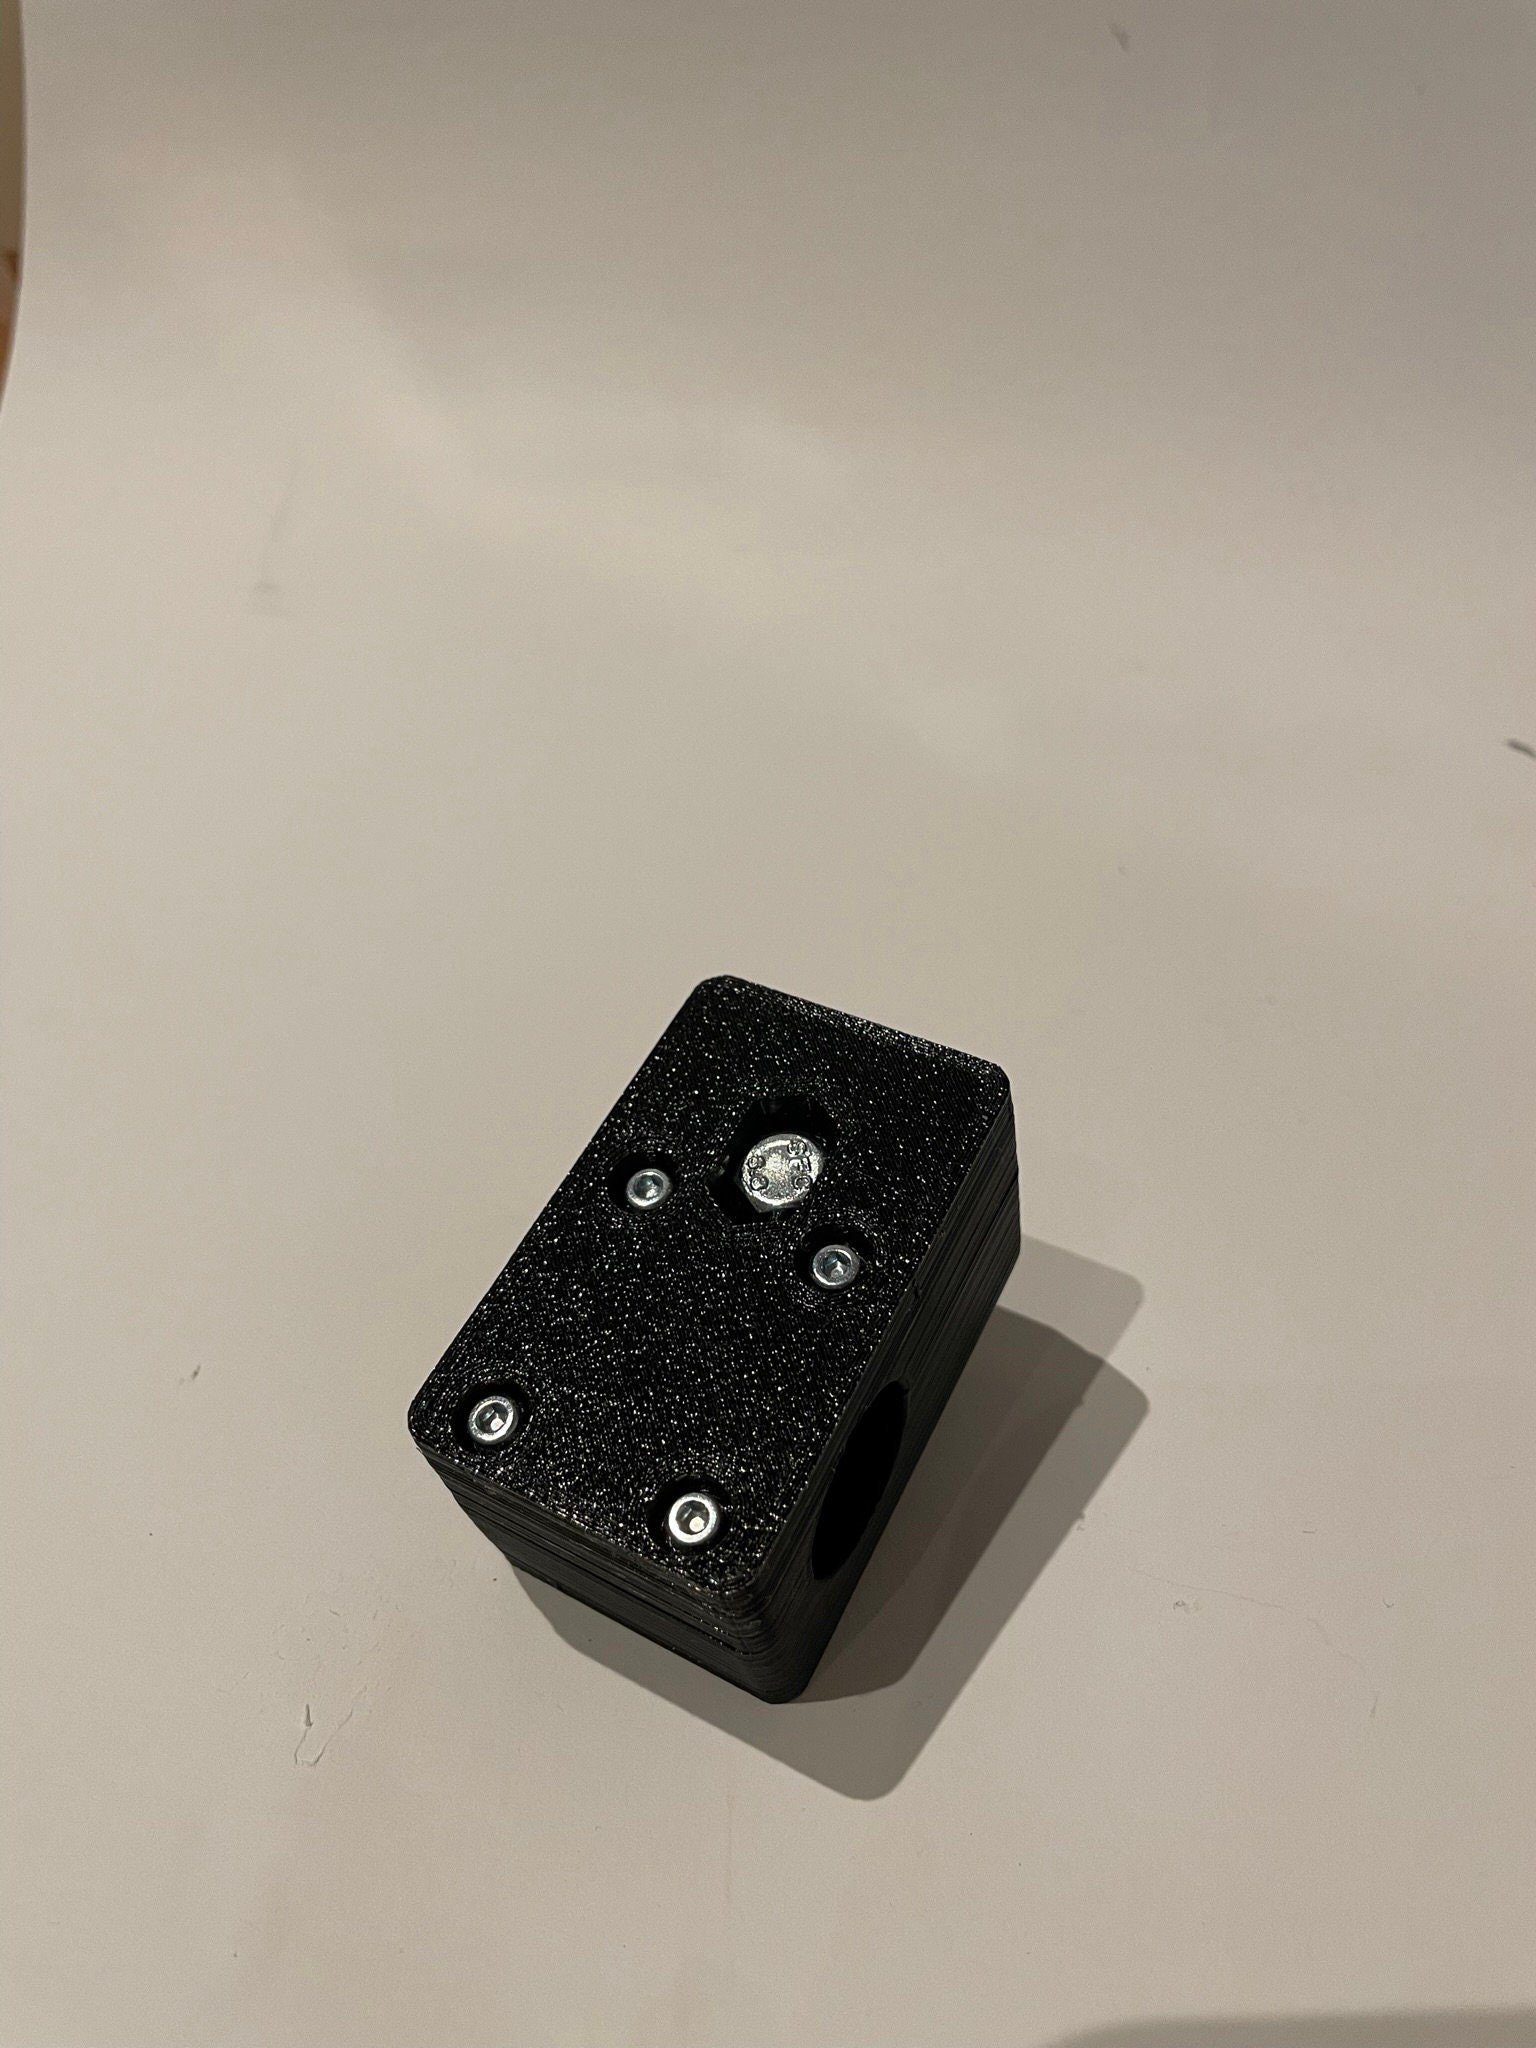 Playseat Challenge Fanatec Pedals v3's Mount by VandaL